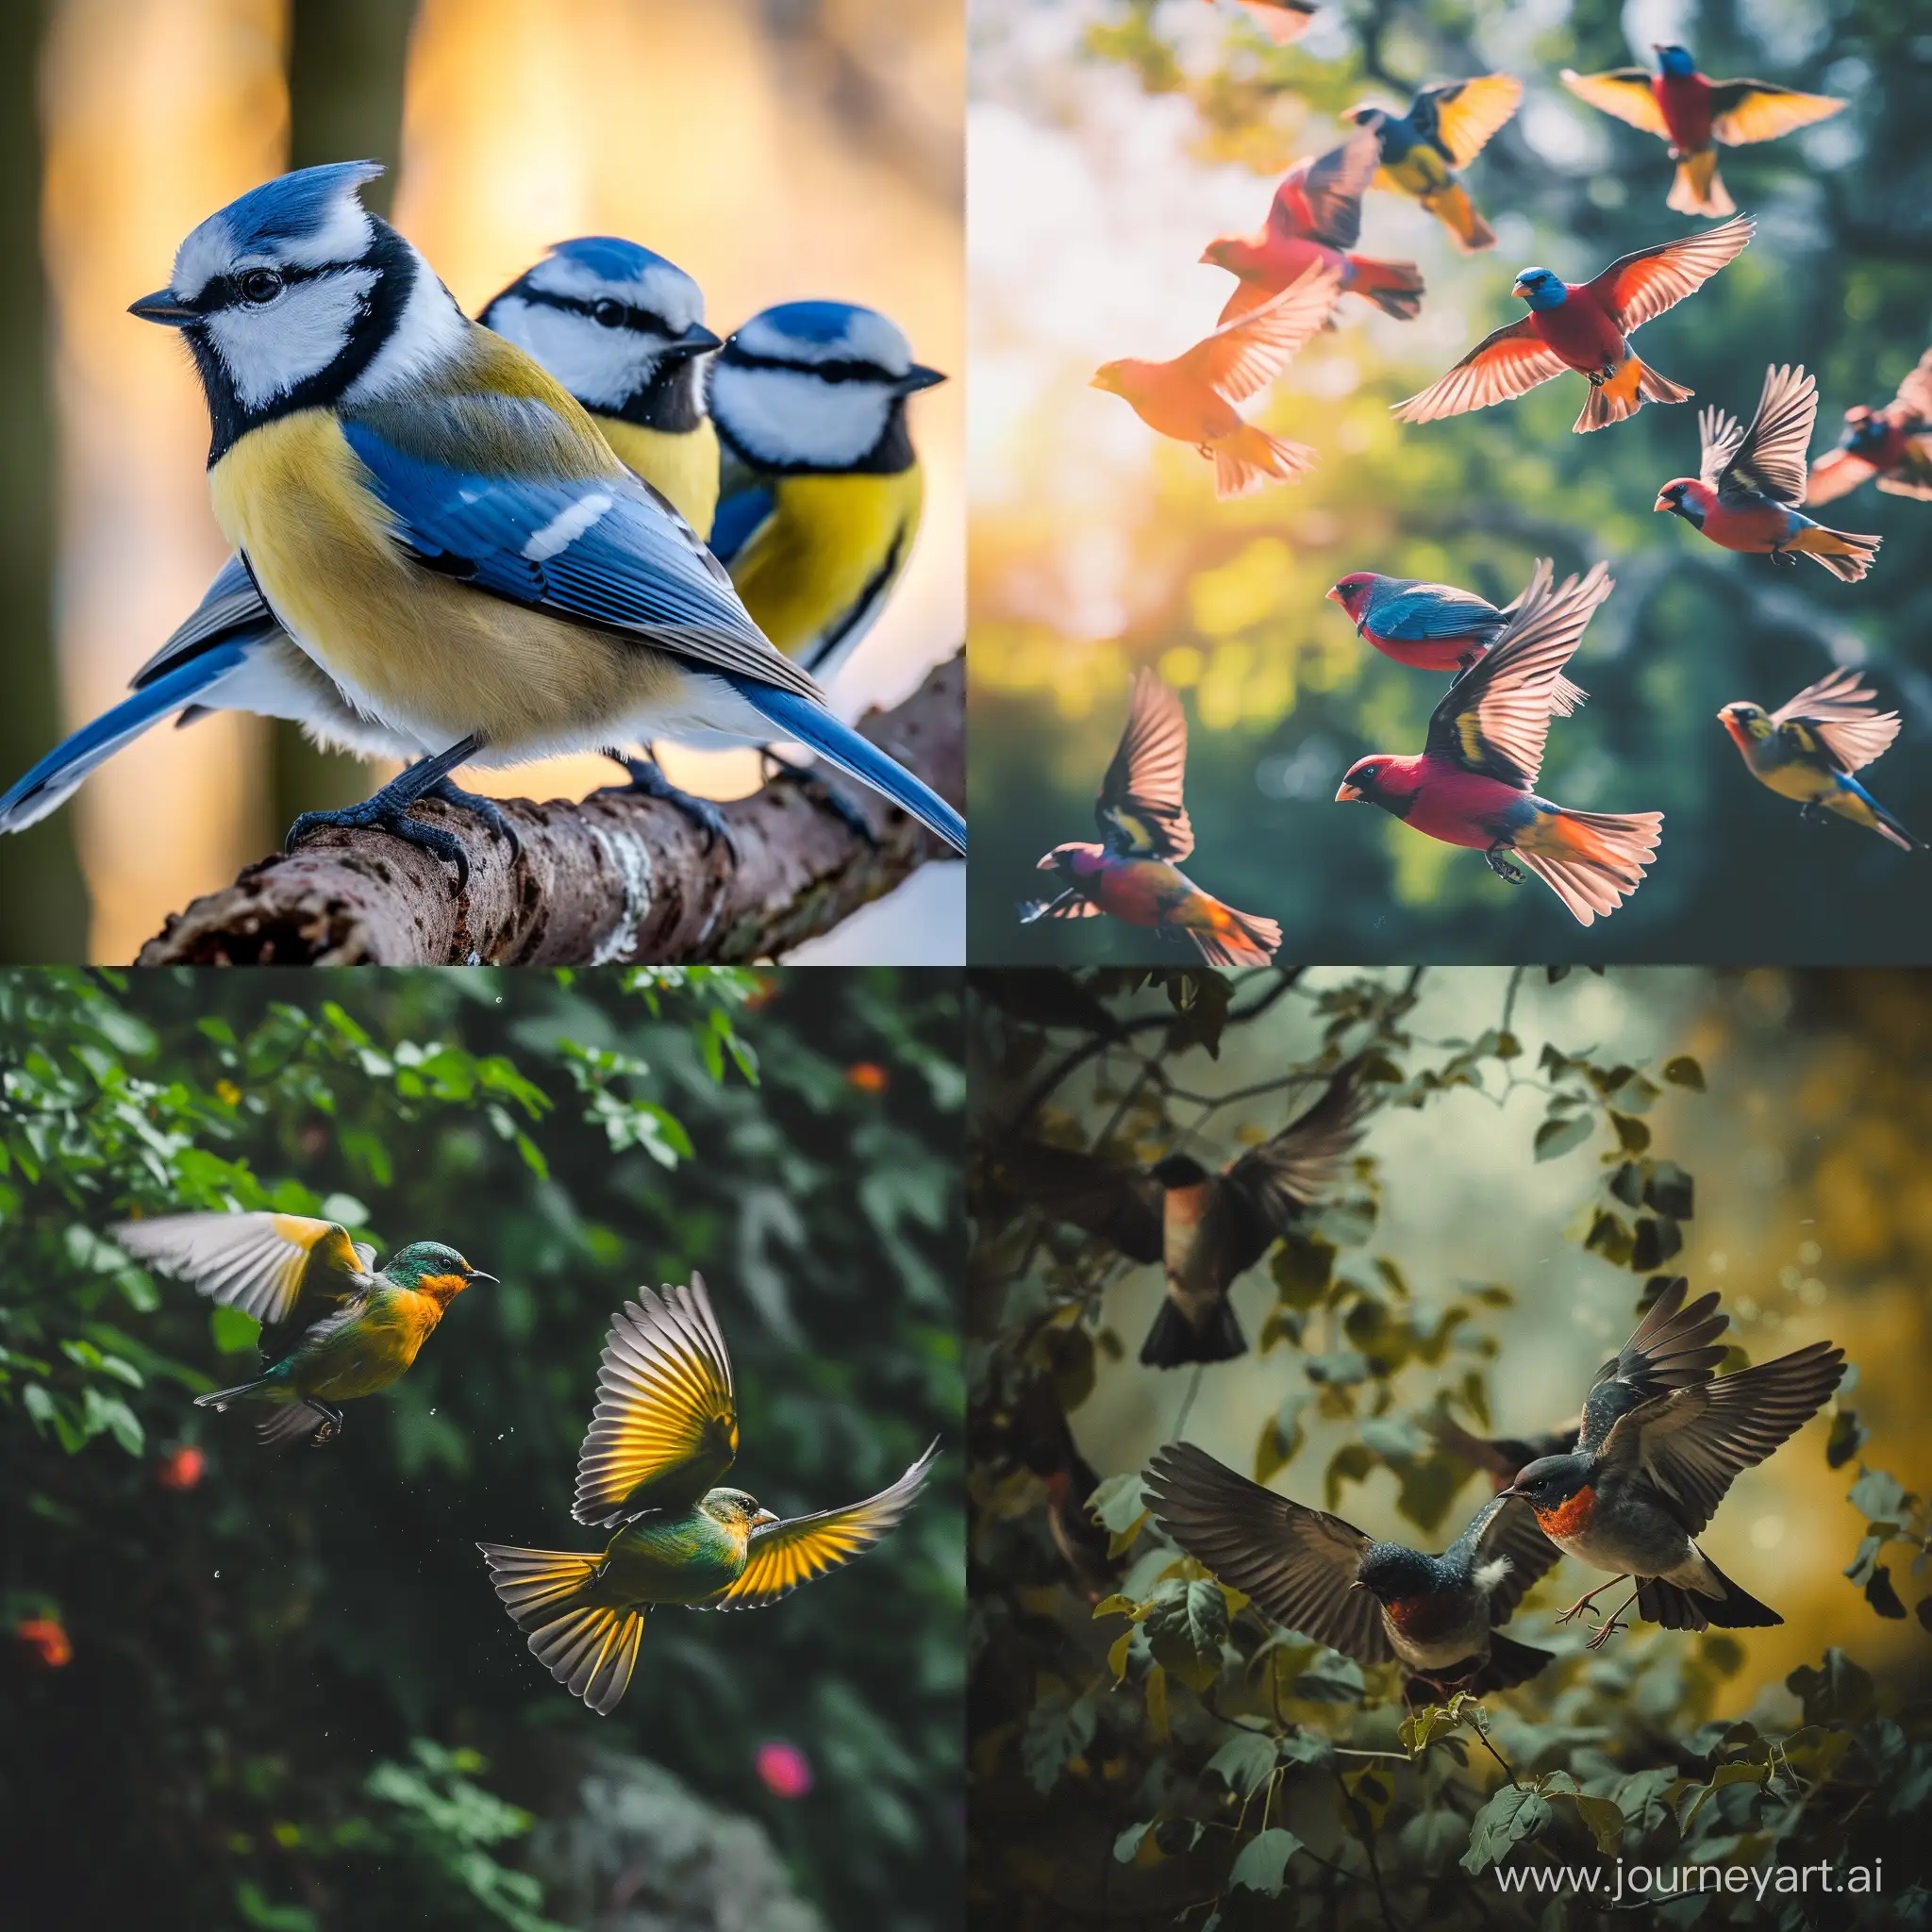 Vibrant-5K-Image-Capturing-the-Essence-of-6-Birds-in-a-11-Aspect-Ratio